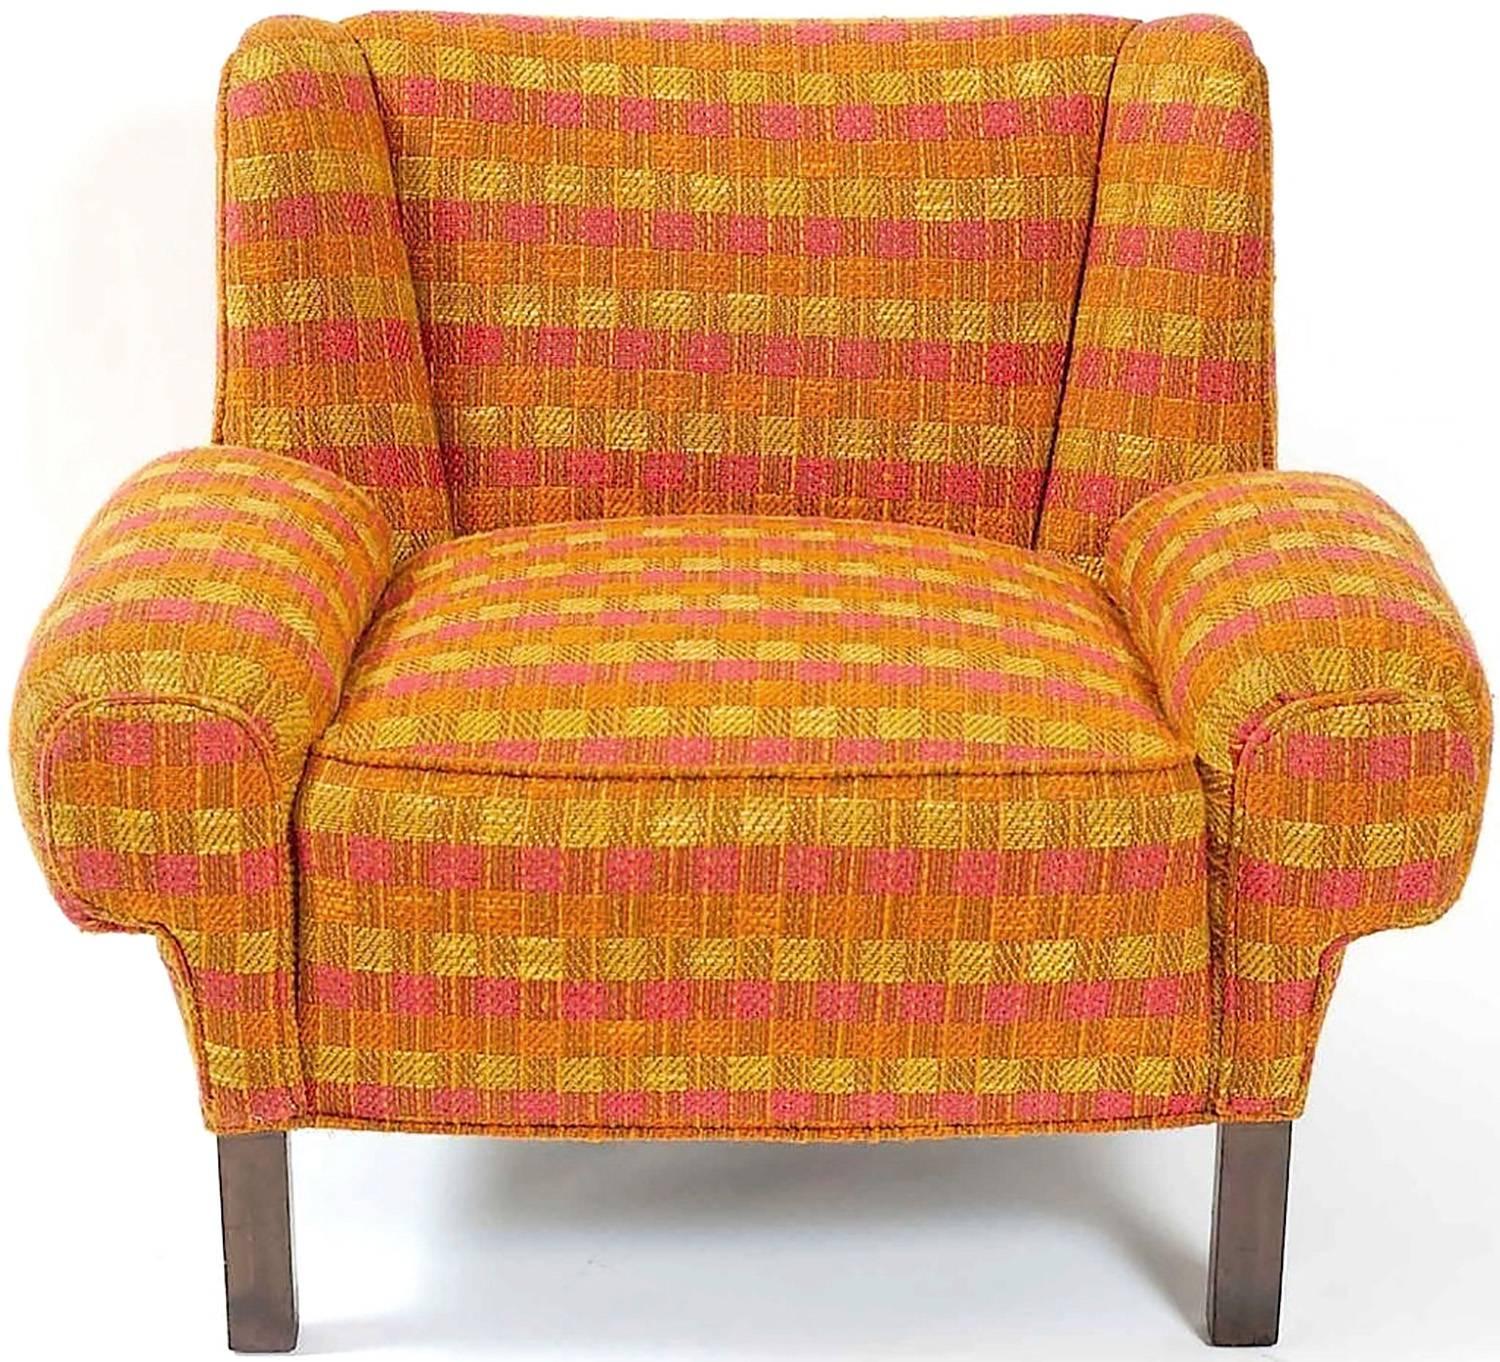 Rare pair of Paul Laszlo for Herman Miller Model L-689 lounge chairs, circa 1948. Original checked nubby wool upholstery in very good condition, a pleasing mix of orange, magenta, and gold. Legs of dark wood.